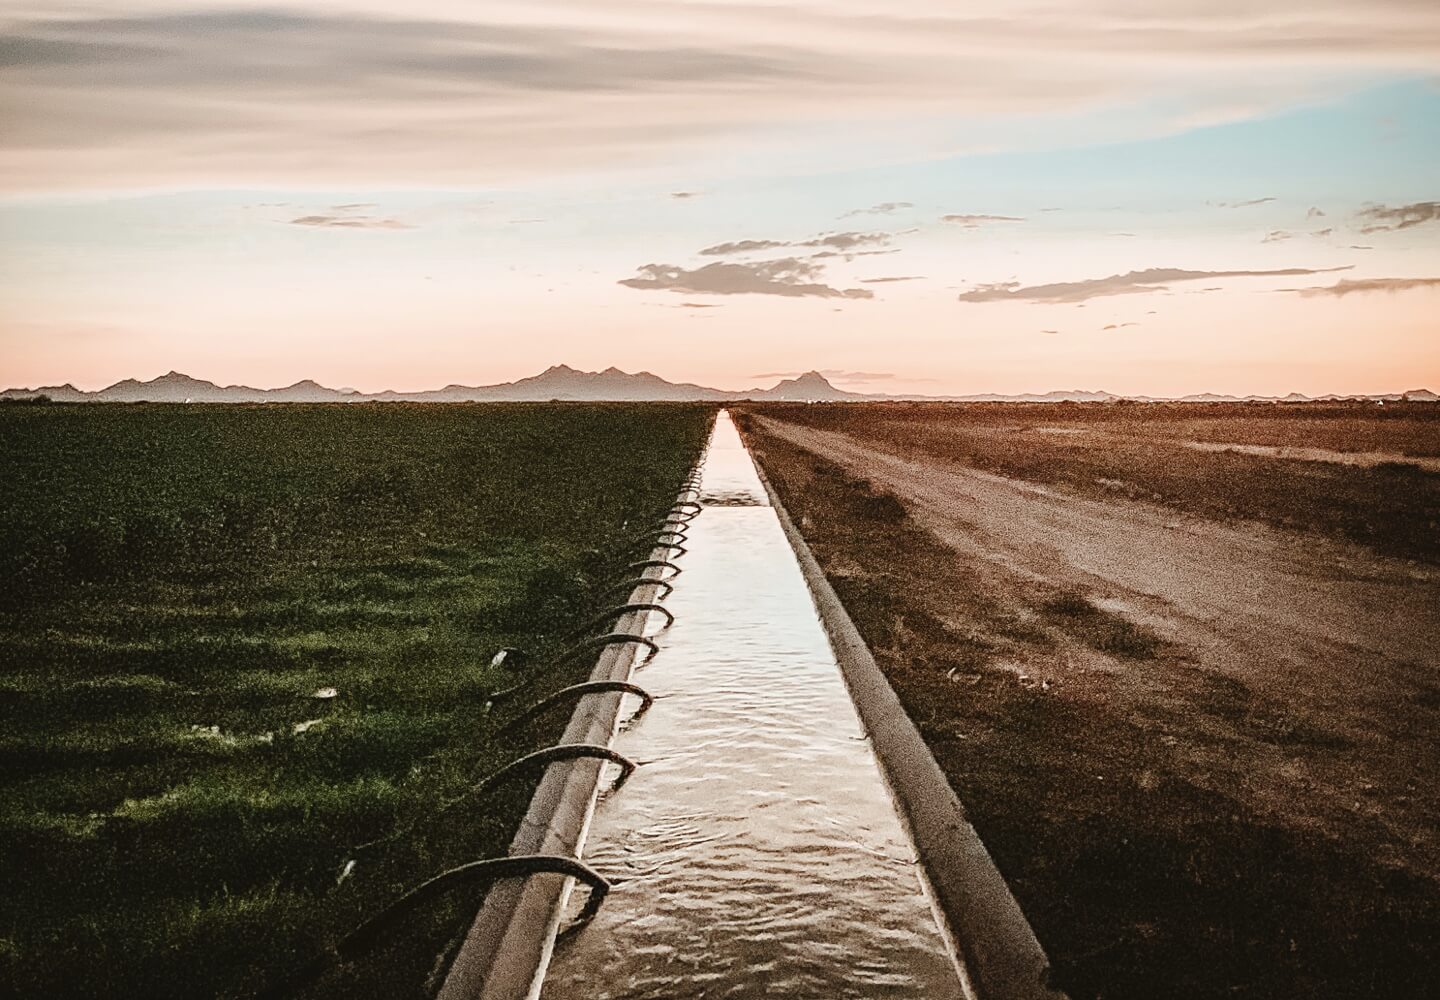 Agricultural water transfers in the Western United States